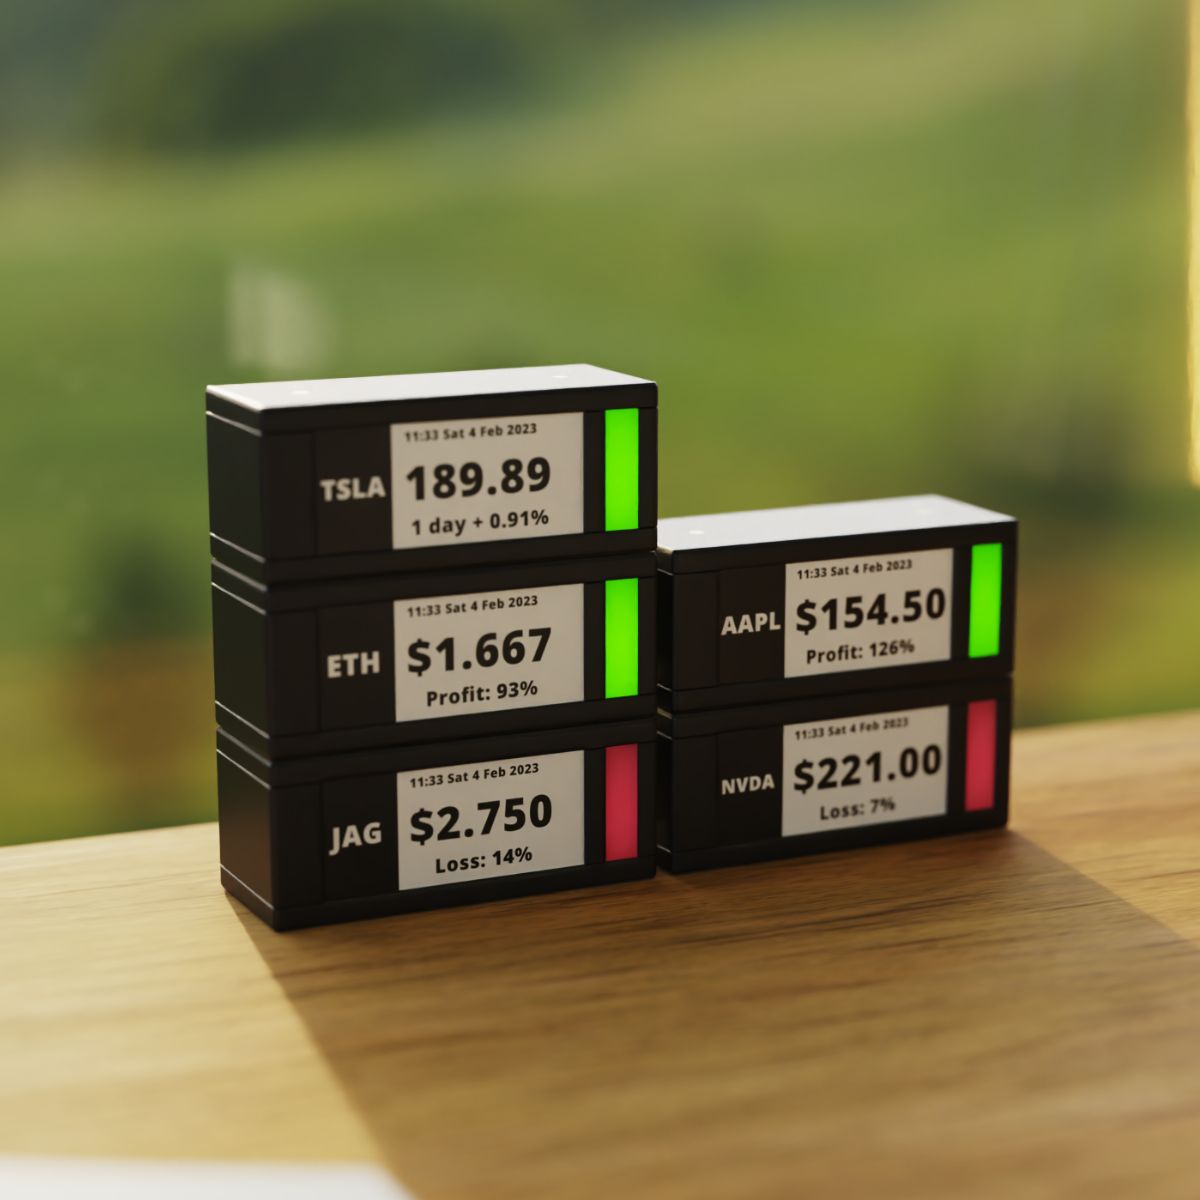 Physical Real-time Stock Ticker Display | TickrMeter - Wake Concept Store  